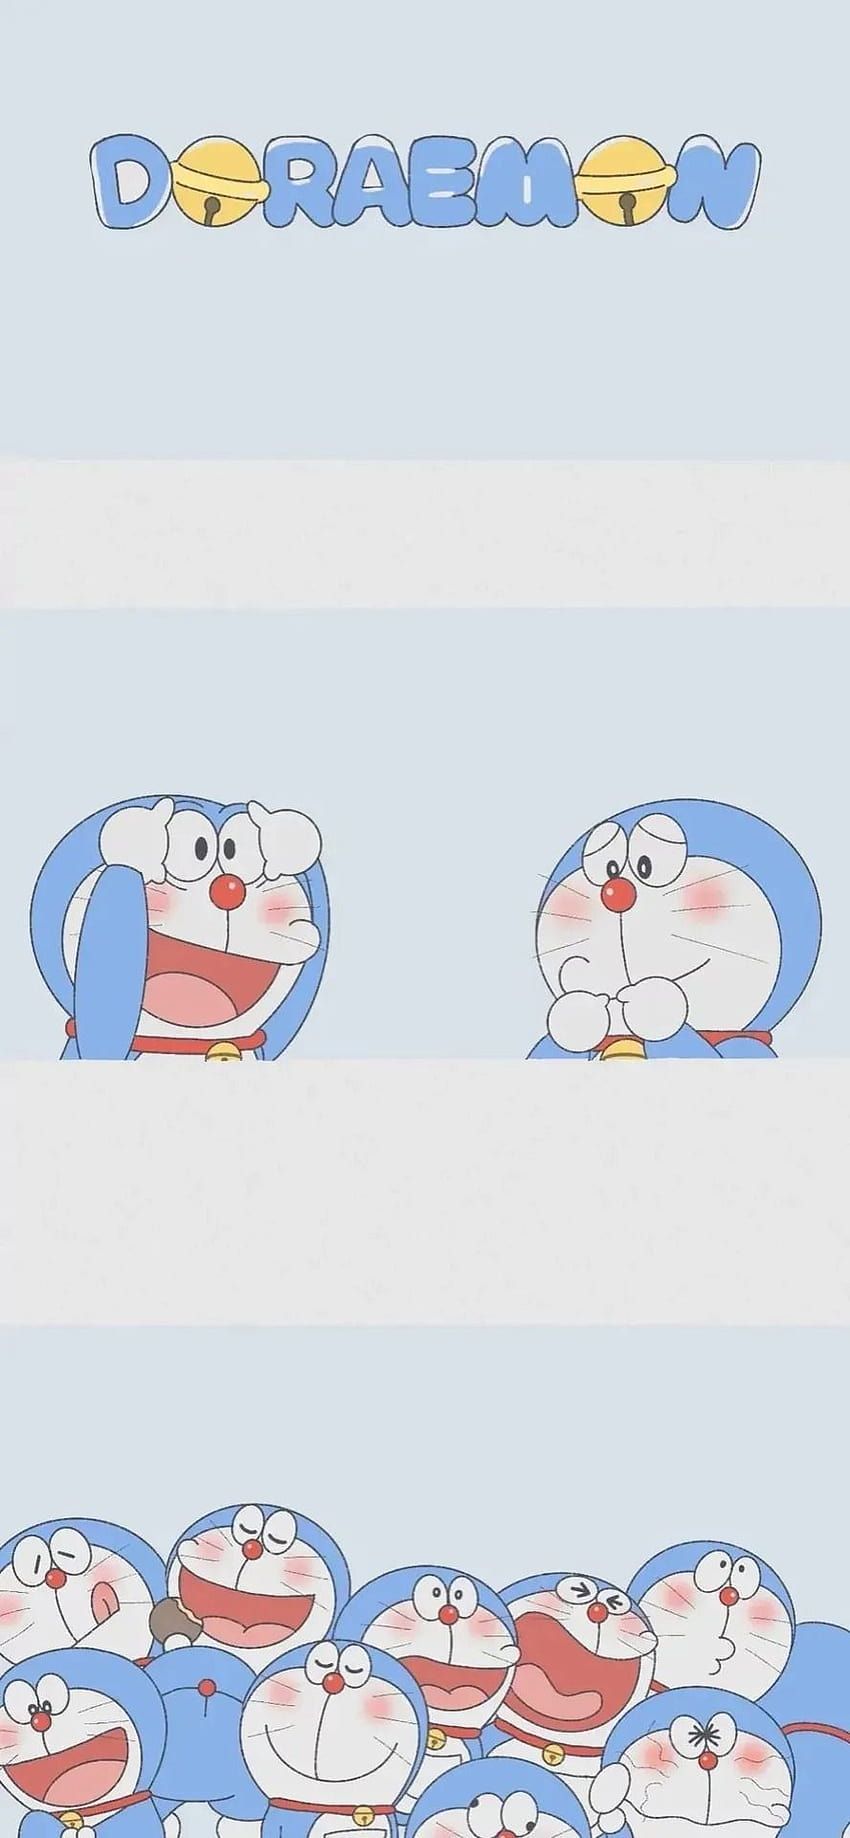 The picture is a cartoon artwork featuring a group of small blue and white cartoon characters - Doraemon